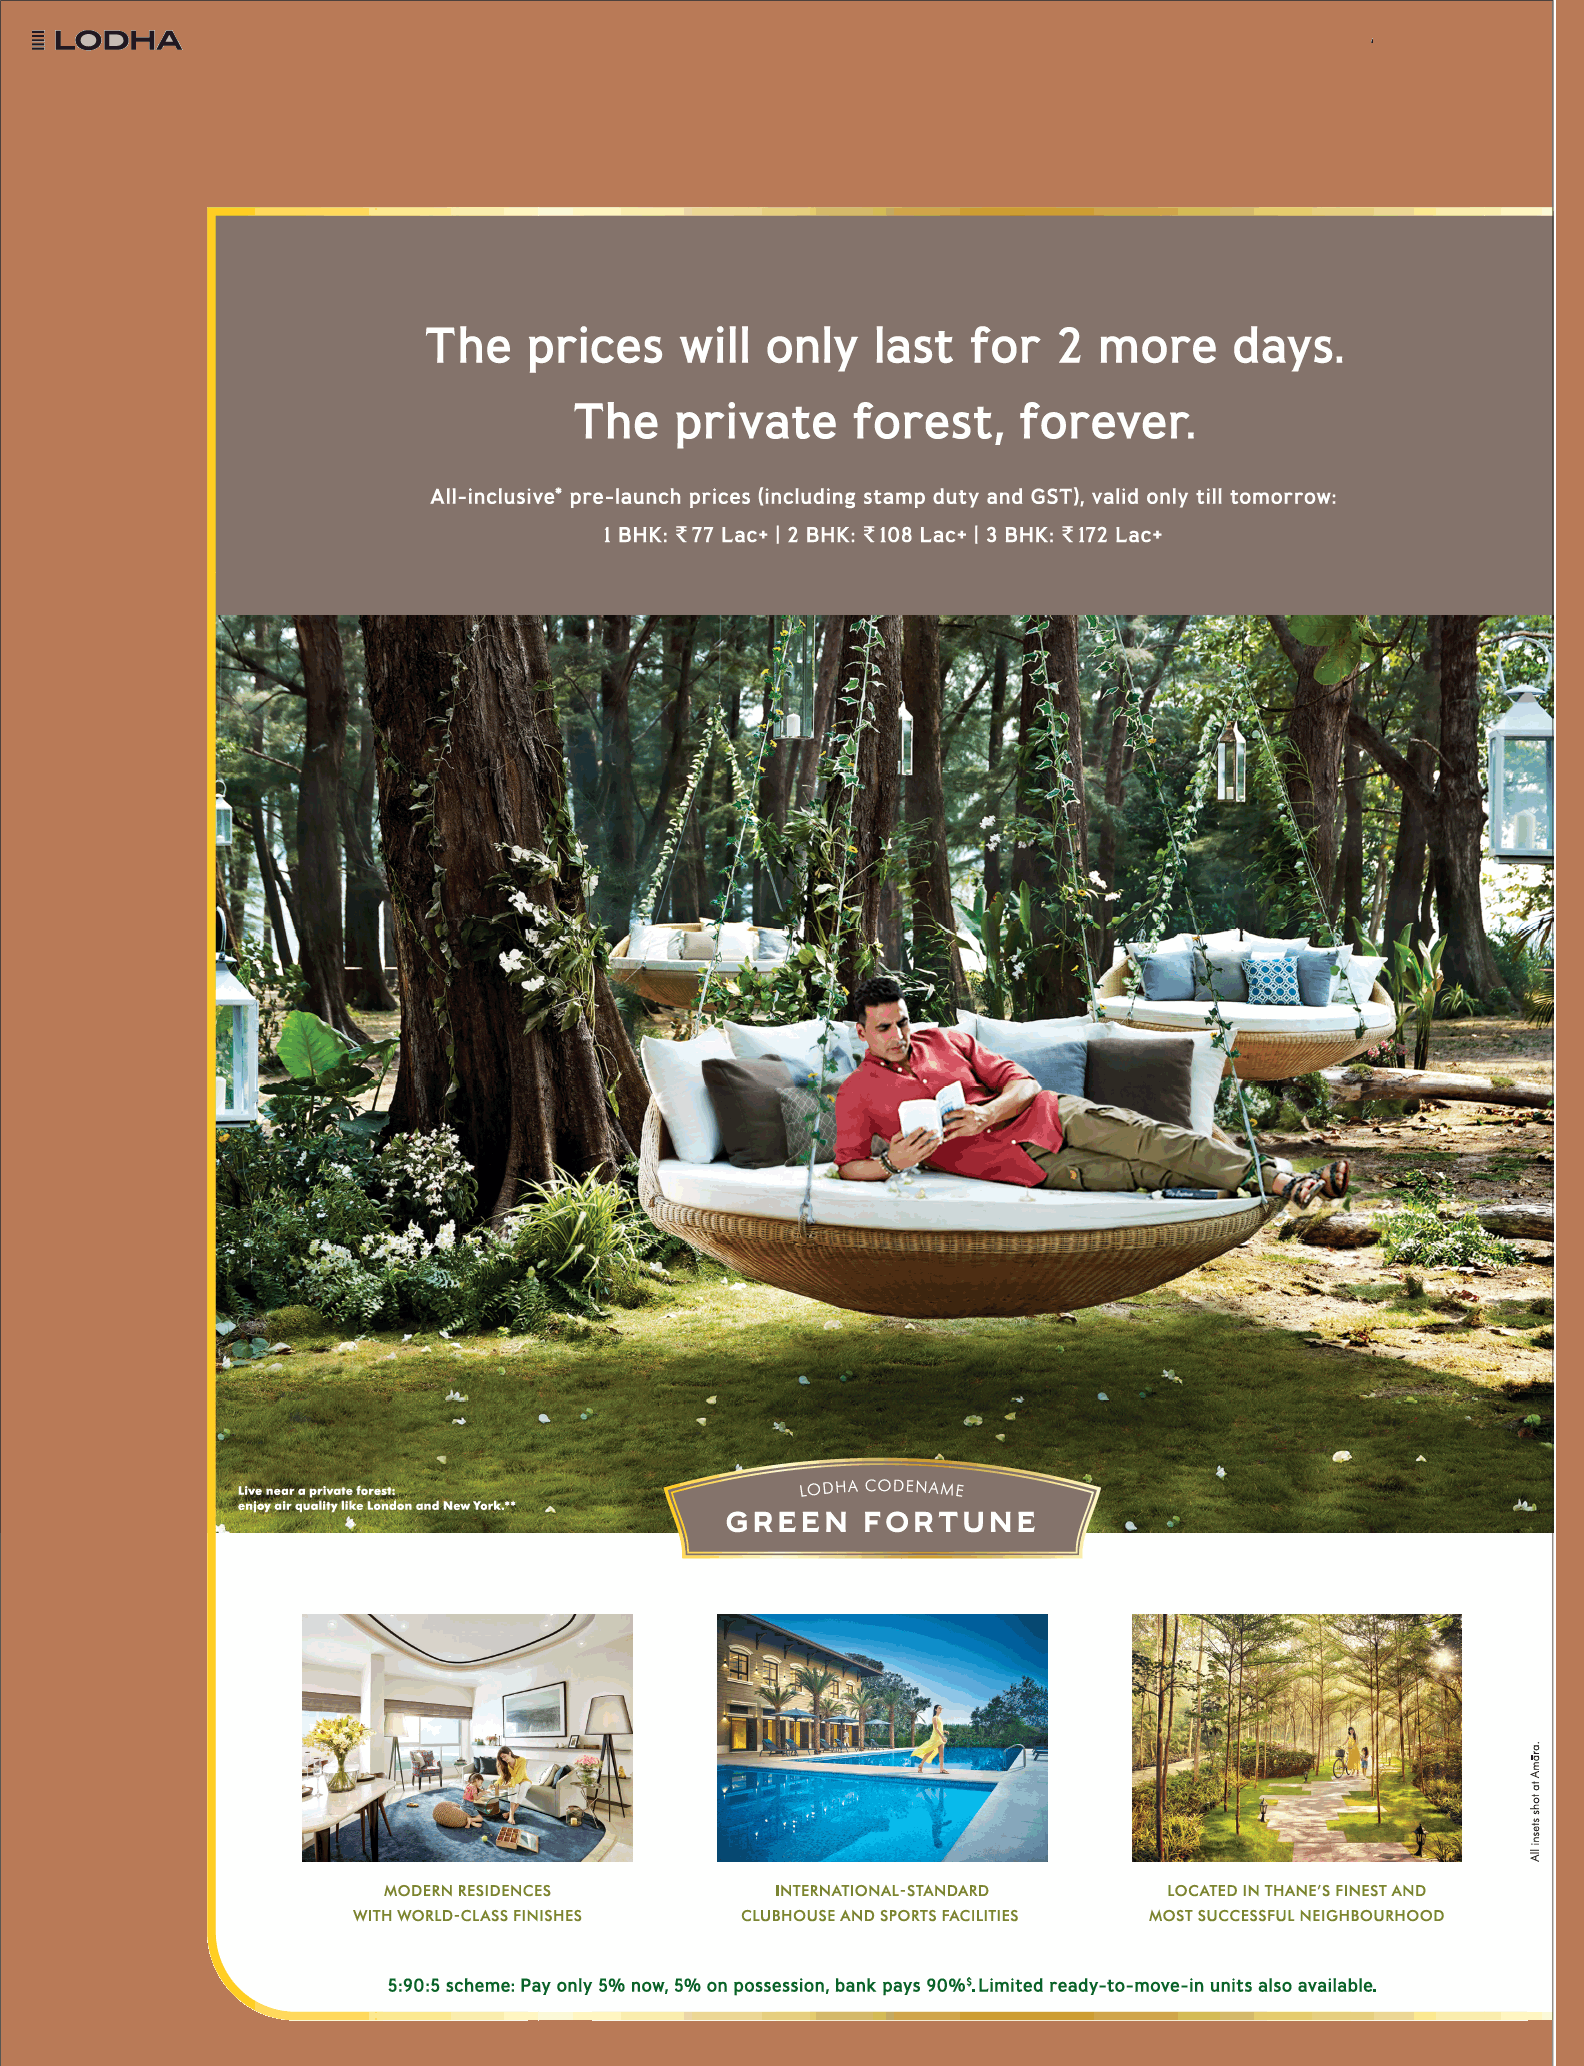 Exclusive offer in Lodha Codename Green Fortune, Mumbai